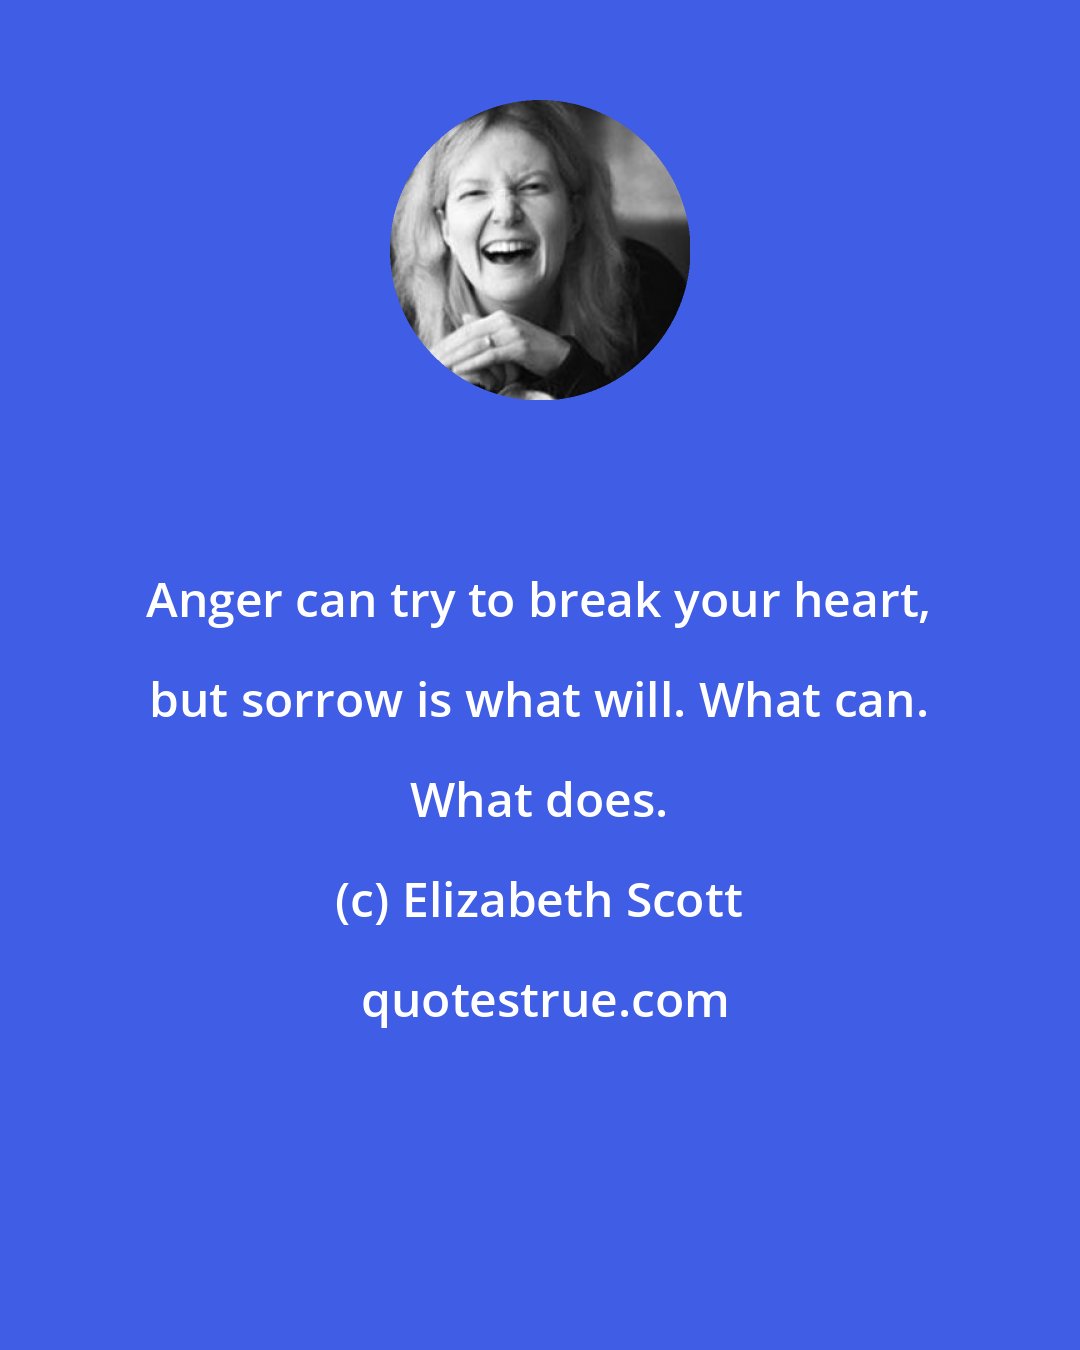 Elizabeth Scott: Anger can try to break your heart, but sorrow is what will. What can. What does.